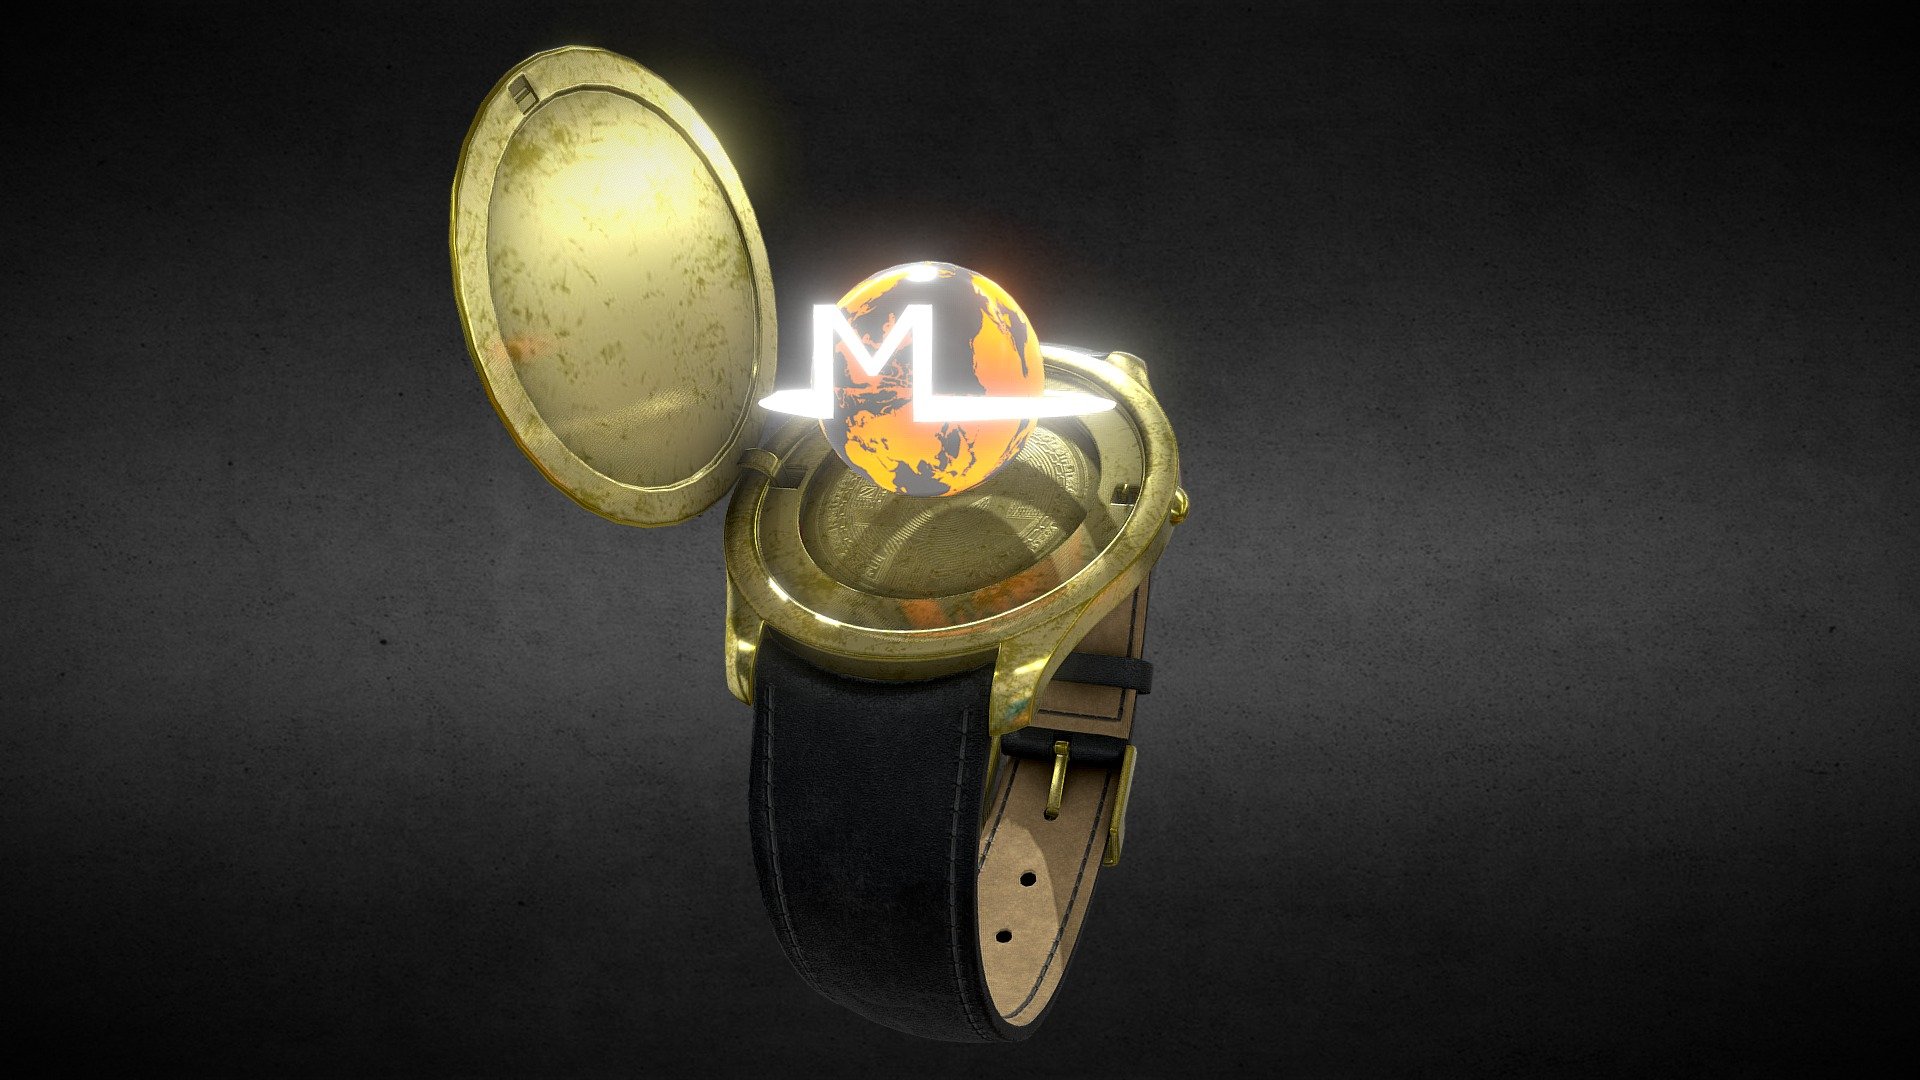 Awesome stainless steel Monero (XMR) Coin Watch.

Currently available for download in FBX format.

3D model developed by AR-Watches 3d model